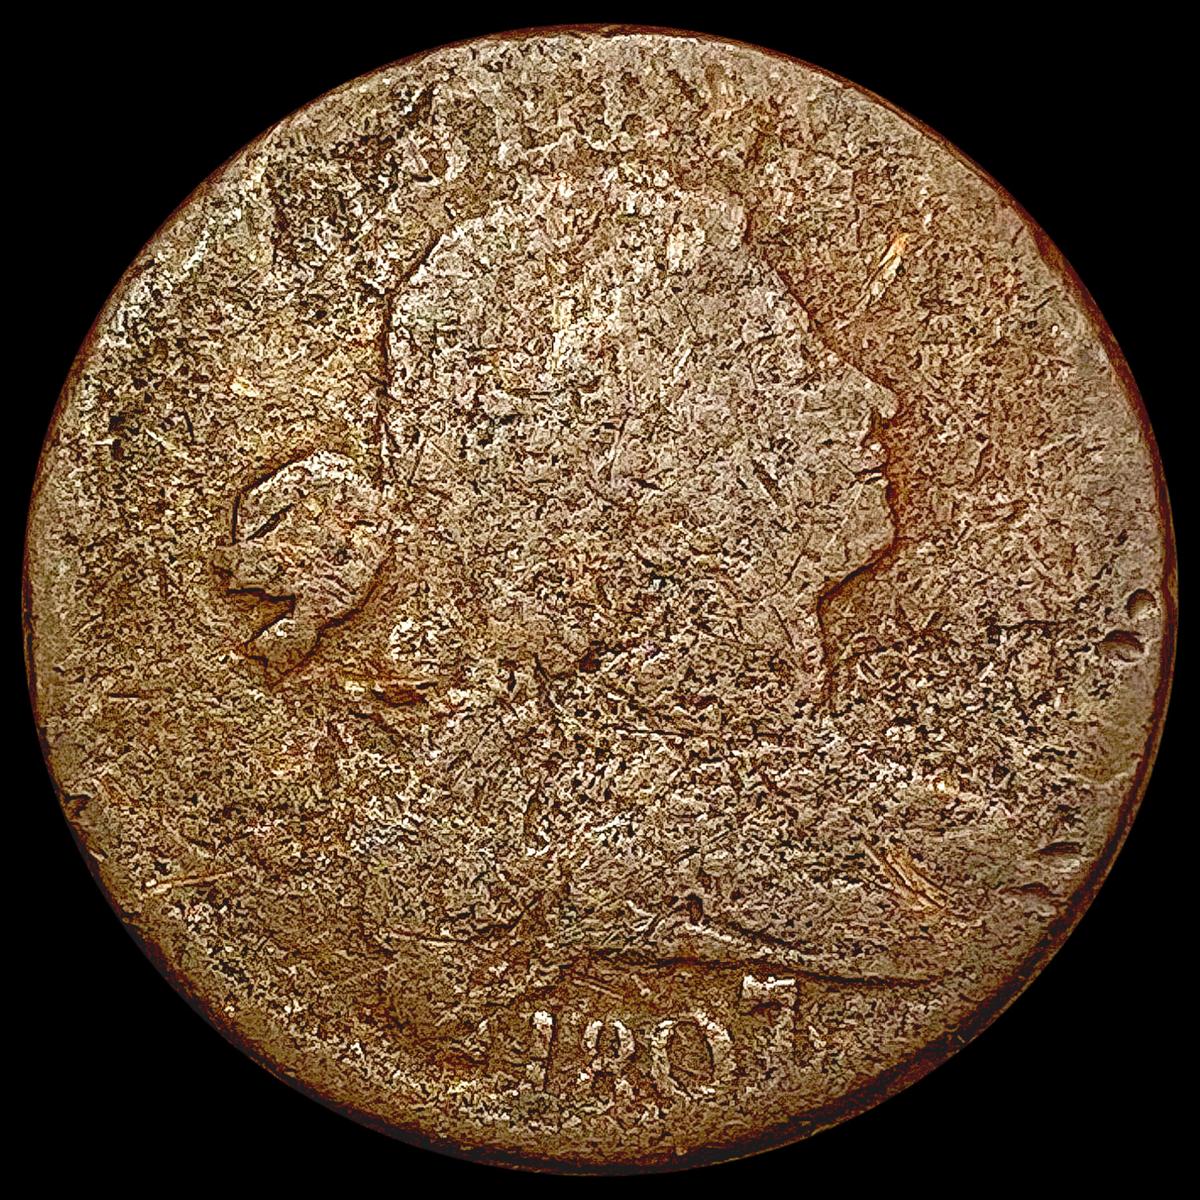 1807 / 6 Draped Bust Large Cent NICELY CIRCULATED